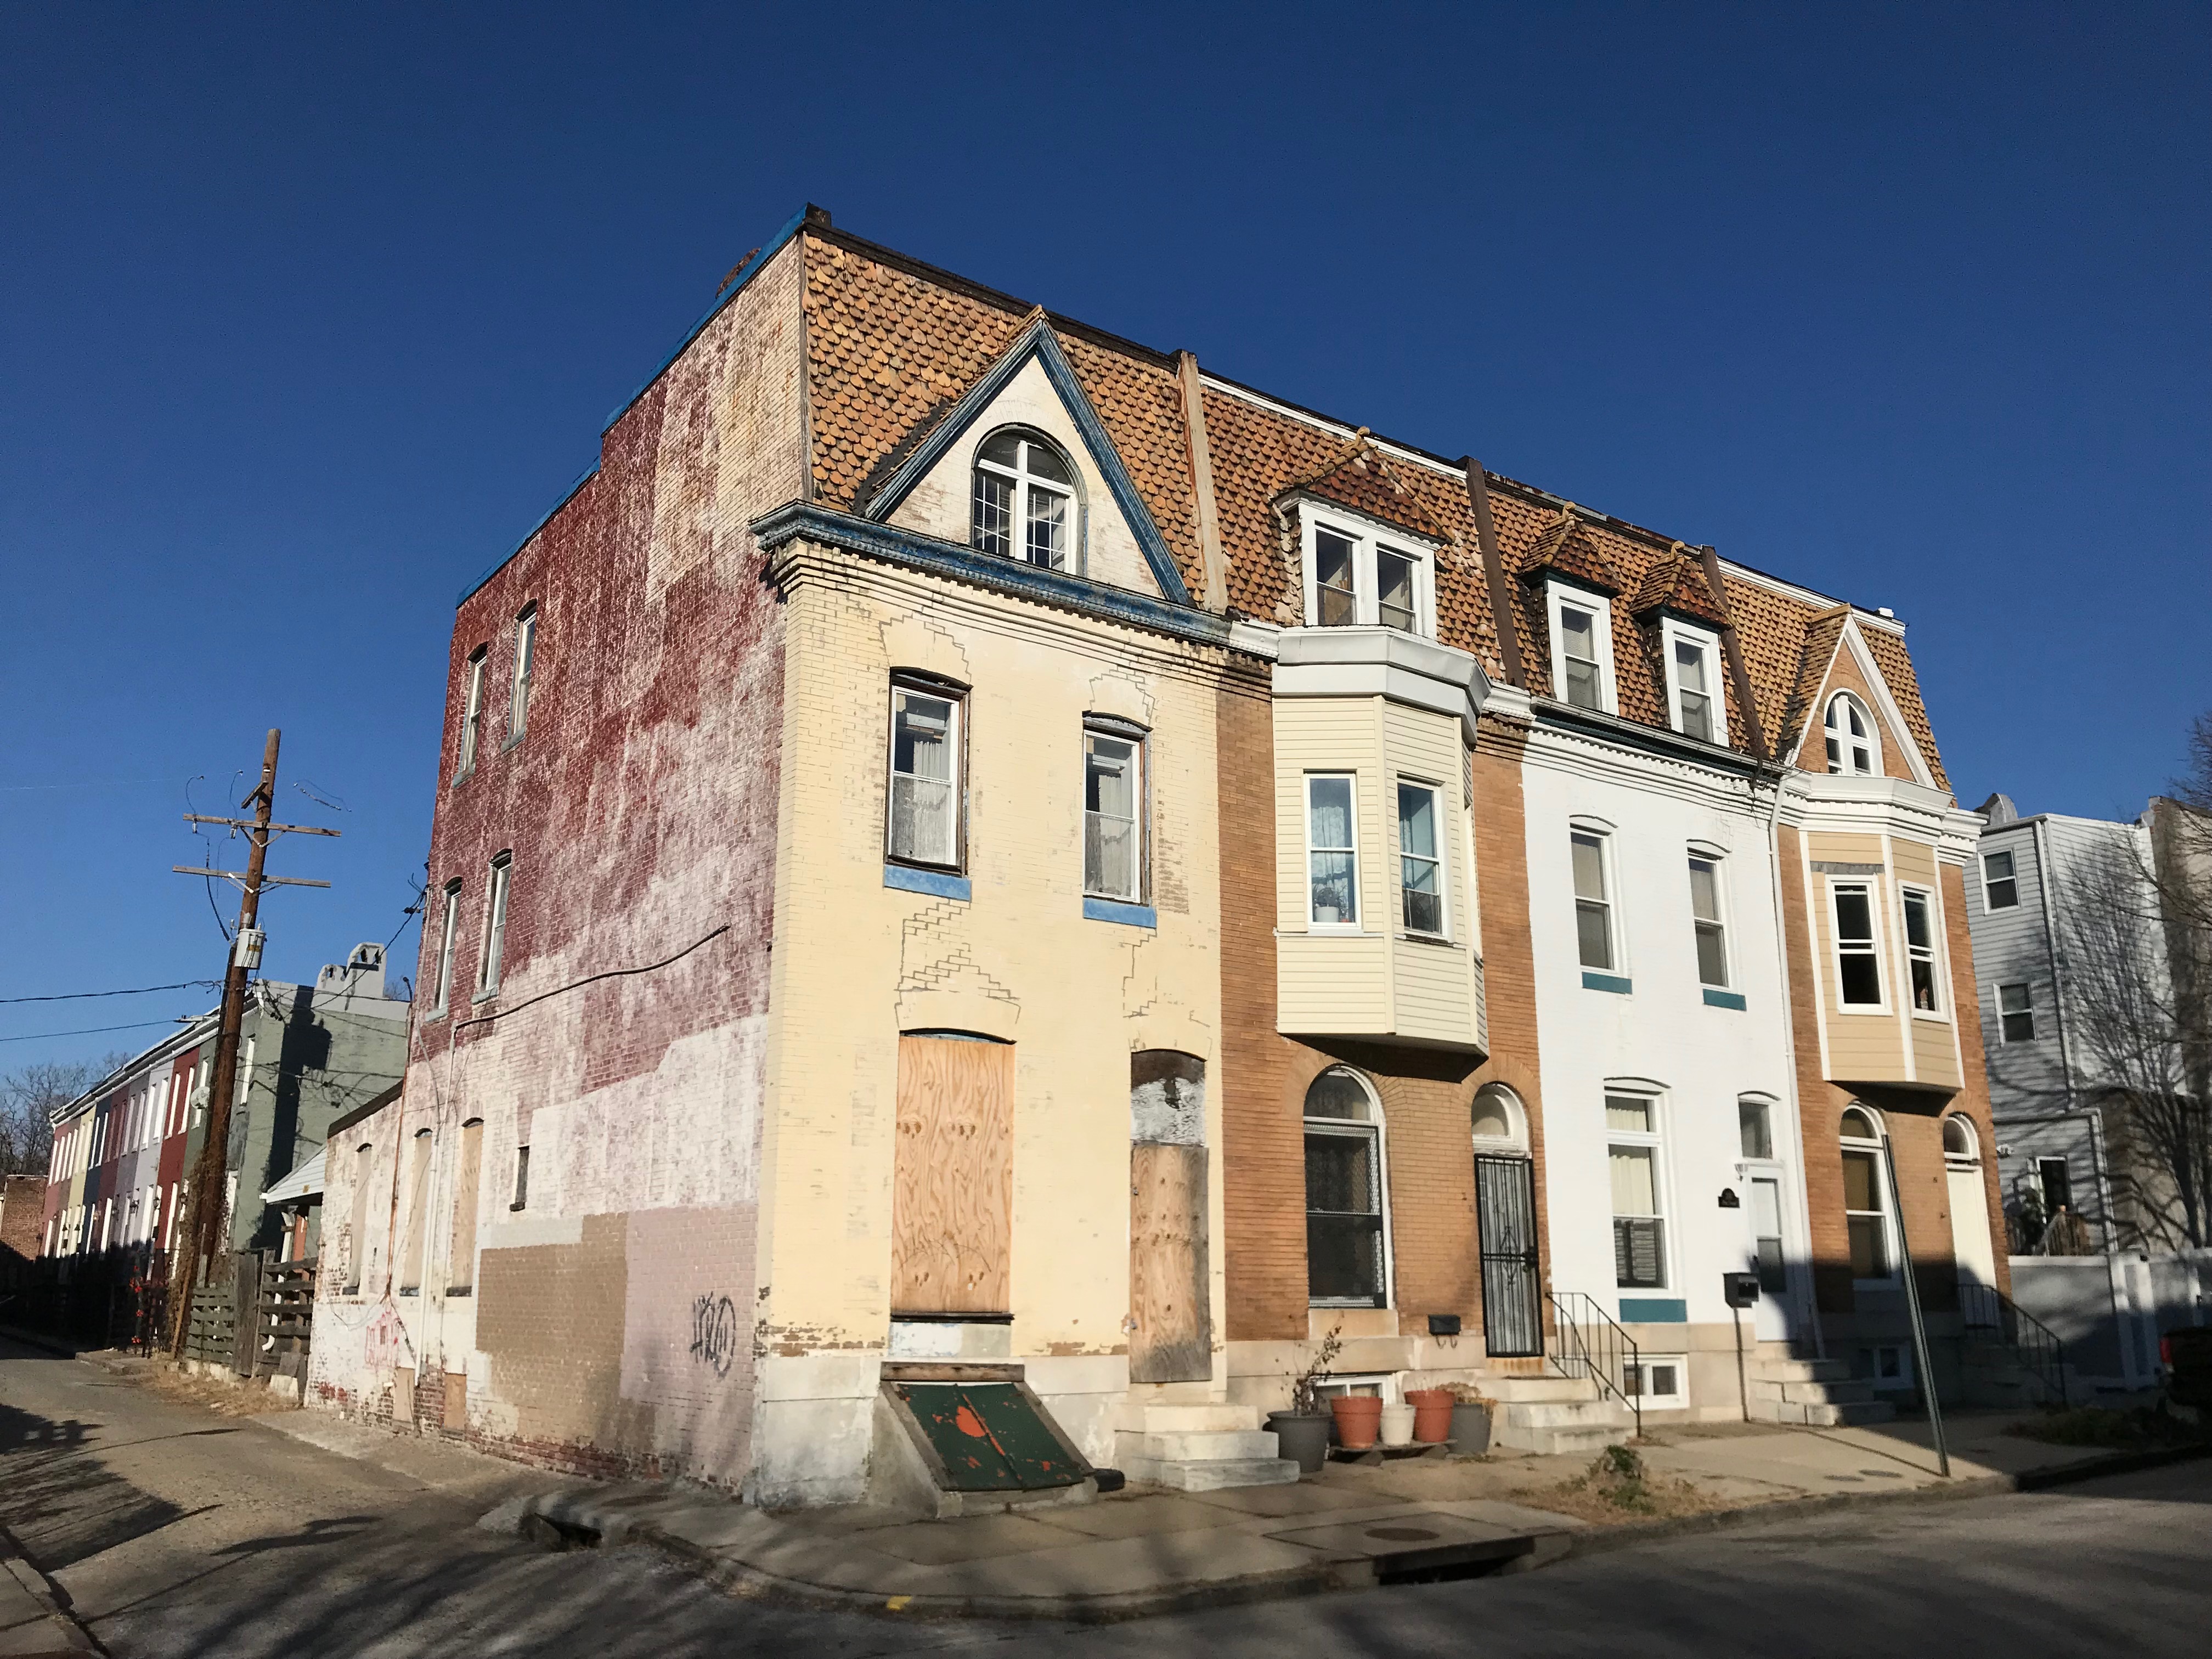 Rowhouses, 200 block of e. 23rd street, baltimore, md 21218 photo